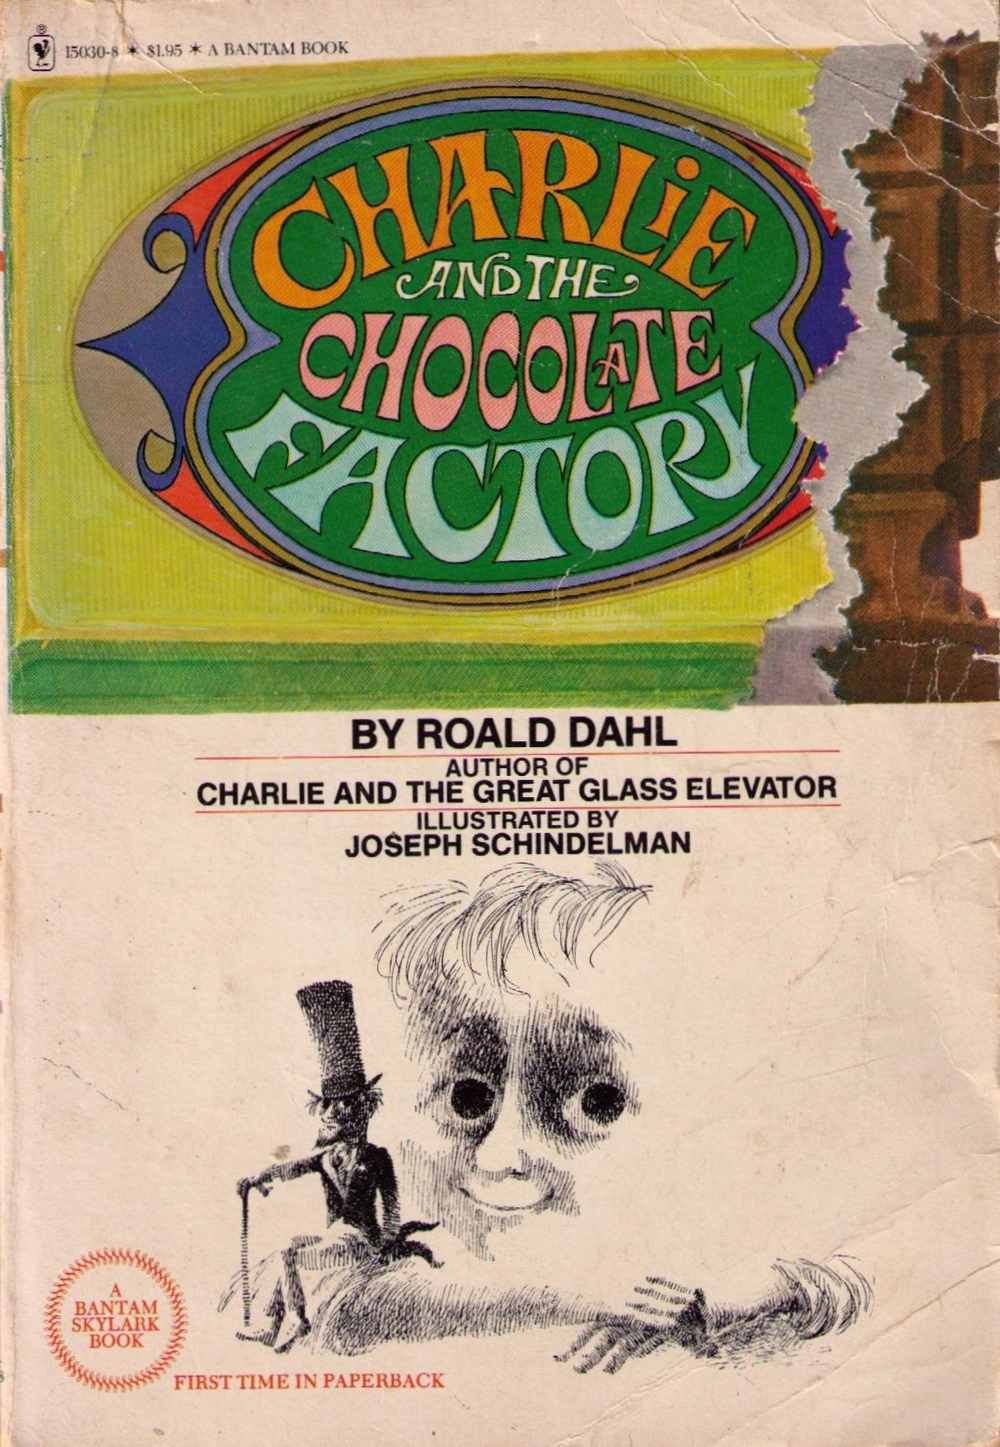 Charlie and the Chocolate Factory is a 1964 children's book by British author Roald Dahl. The story features the adventures of young Charlie Bucket inside the chocolate factory of eccentric chocolatier Willy Wonka